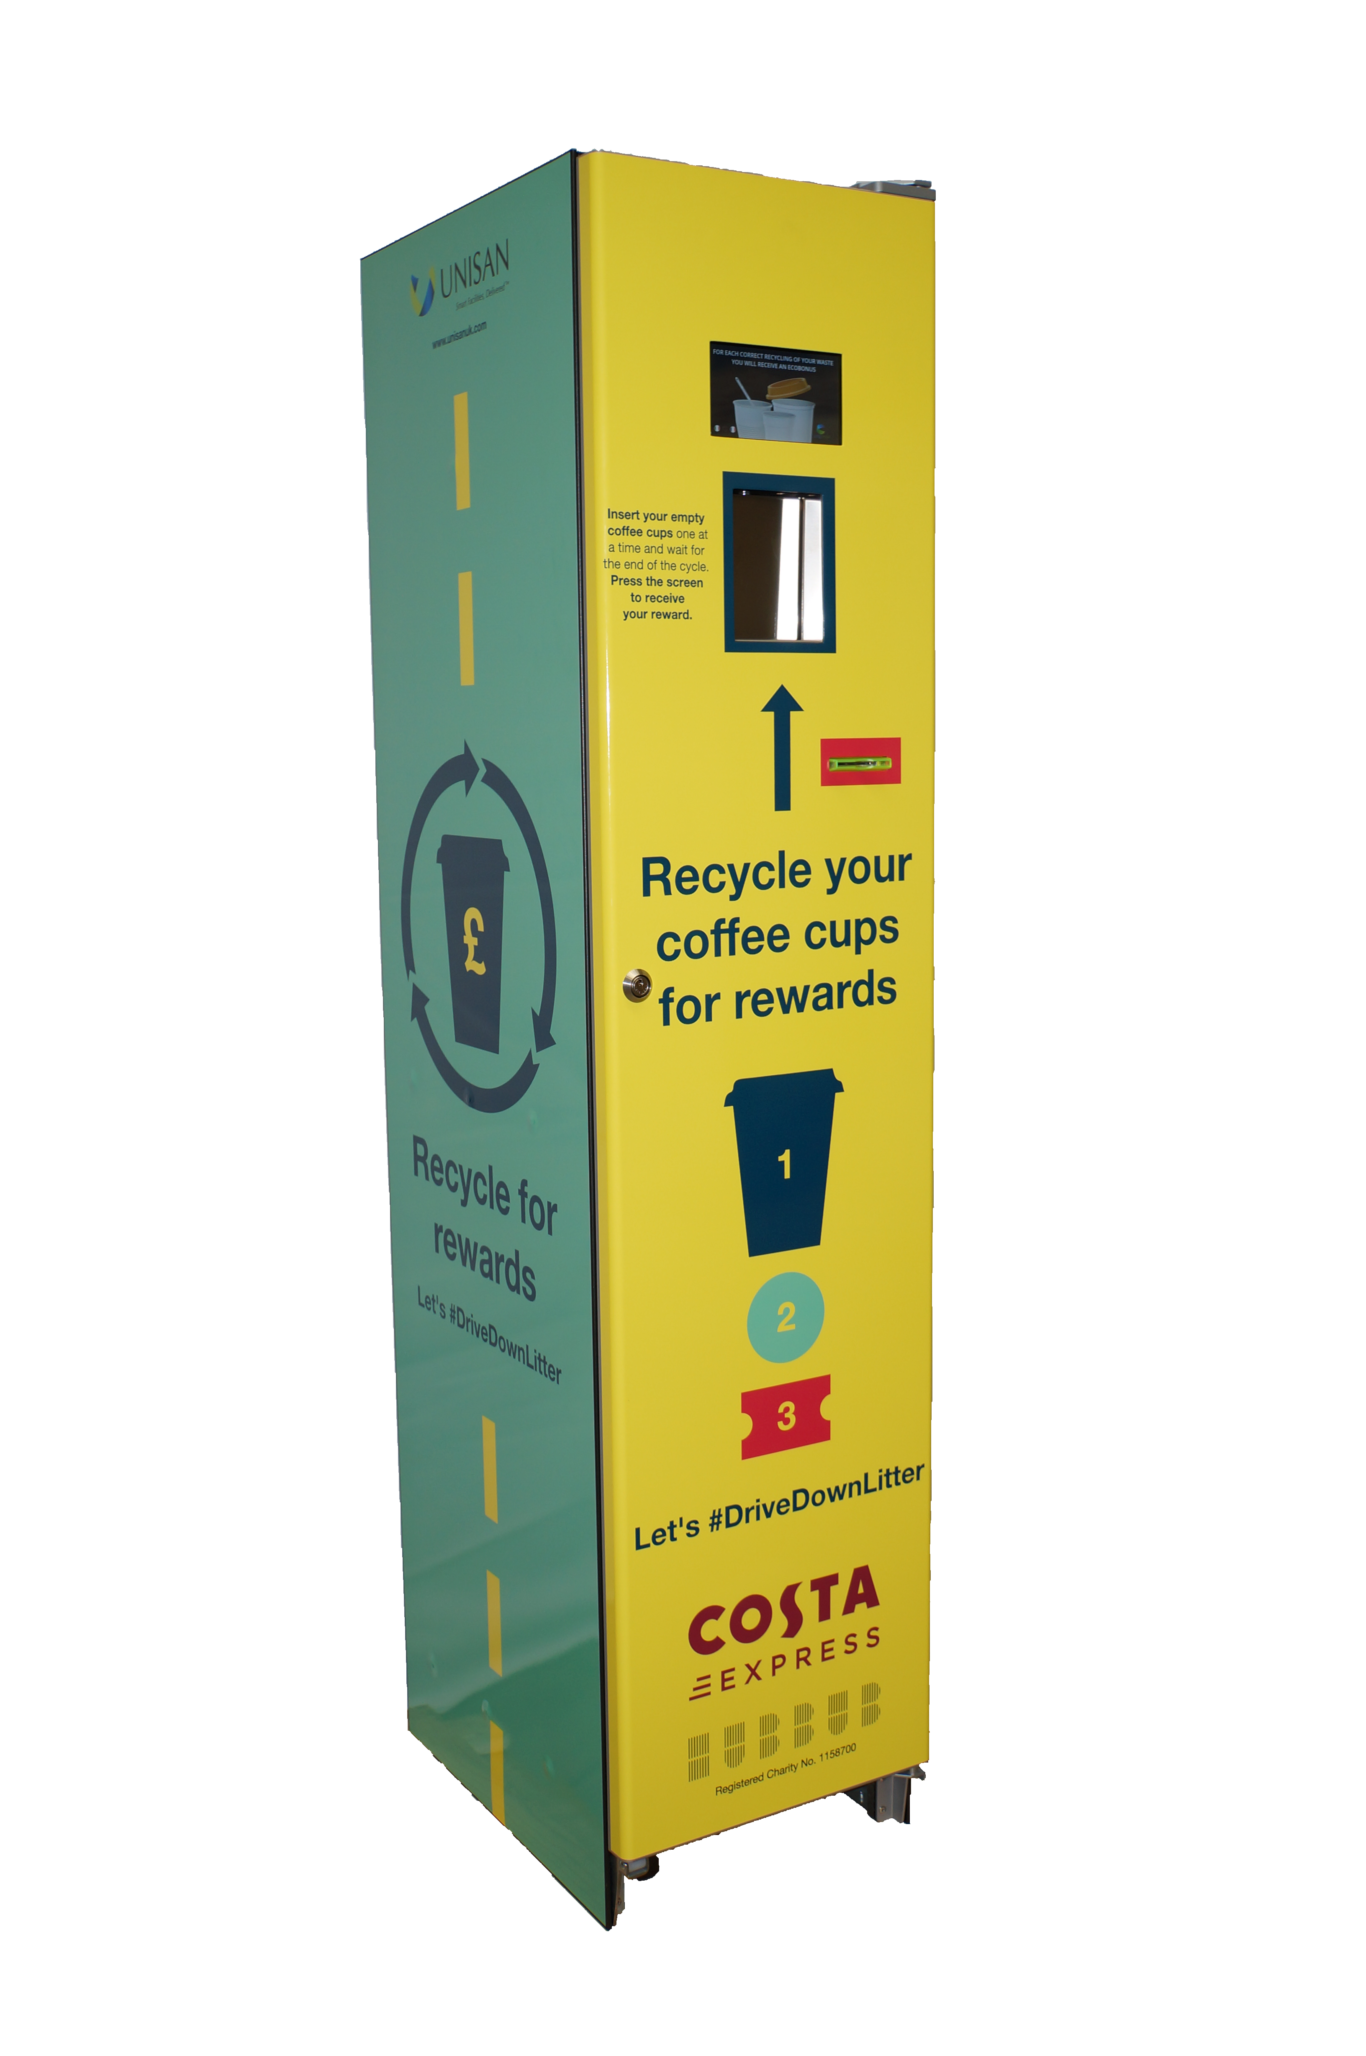 The new machines reward drivers for recycling their coffee cups and plastic bottles 